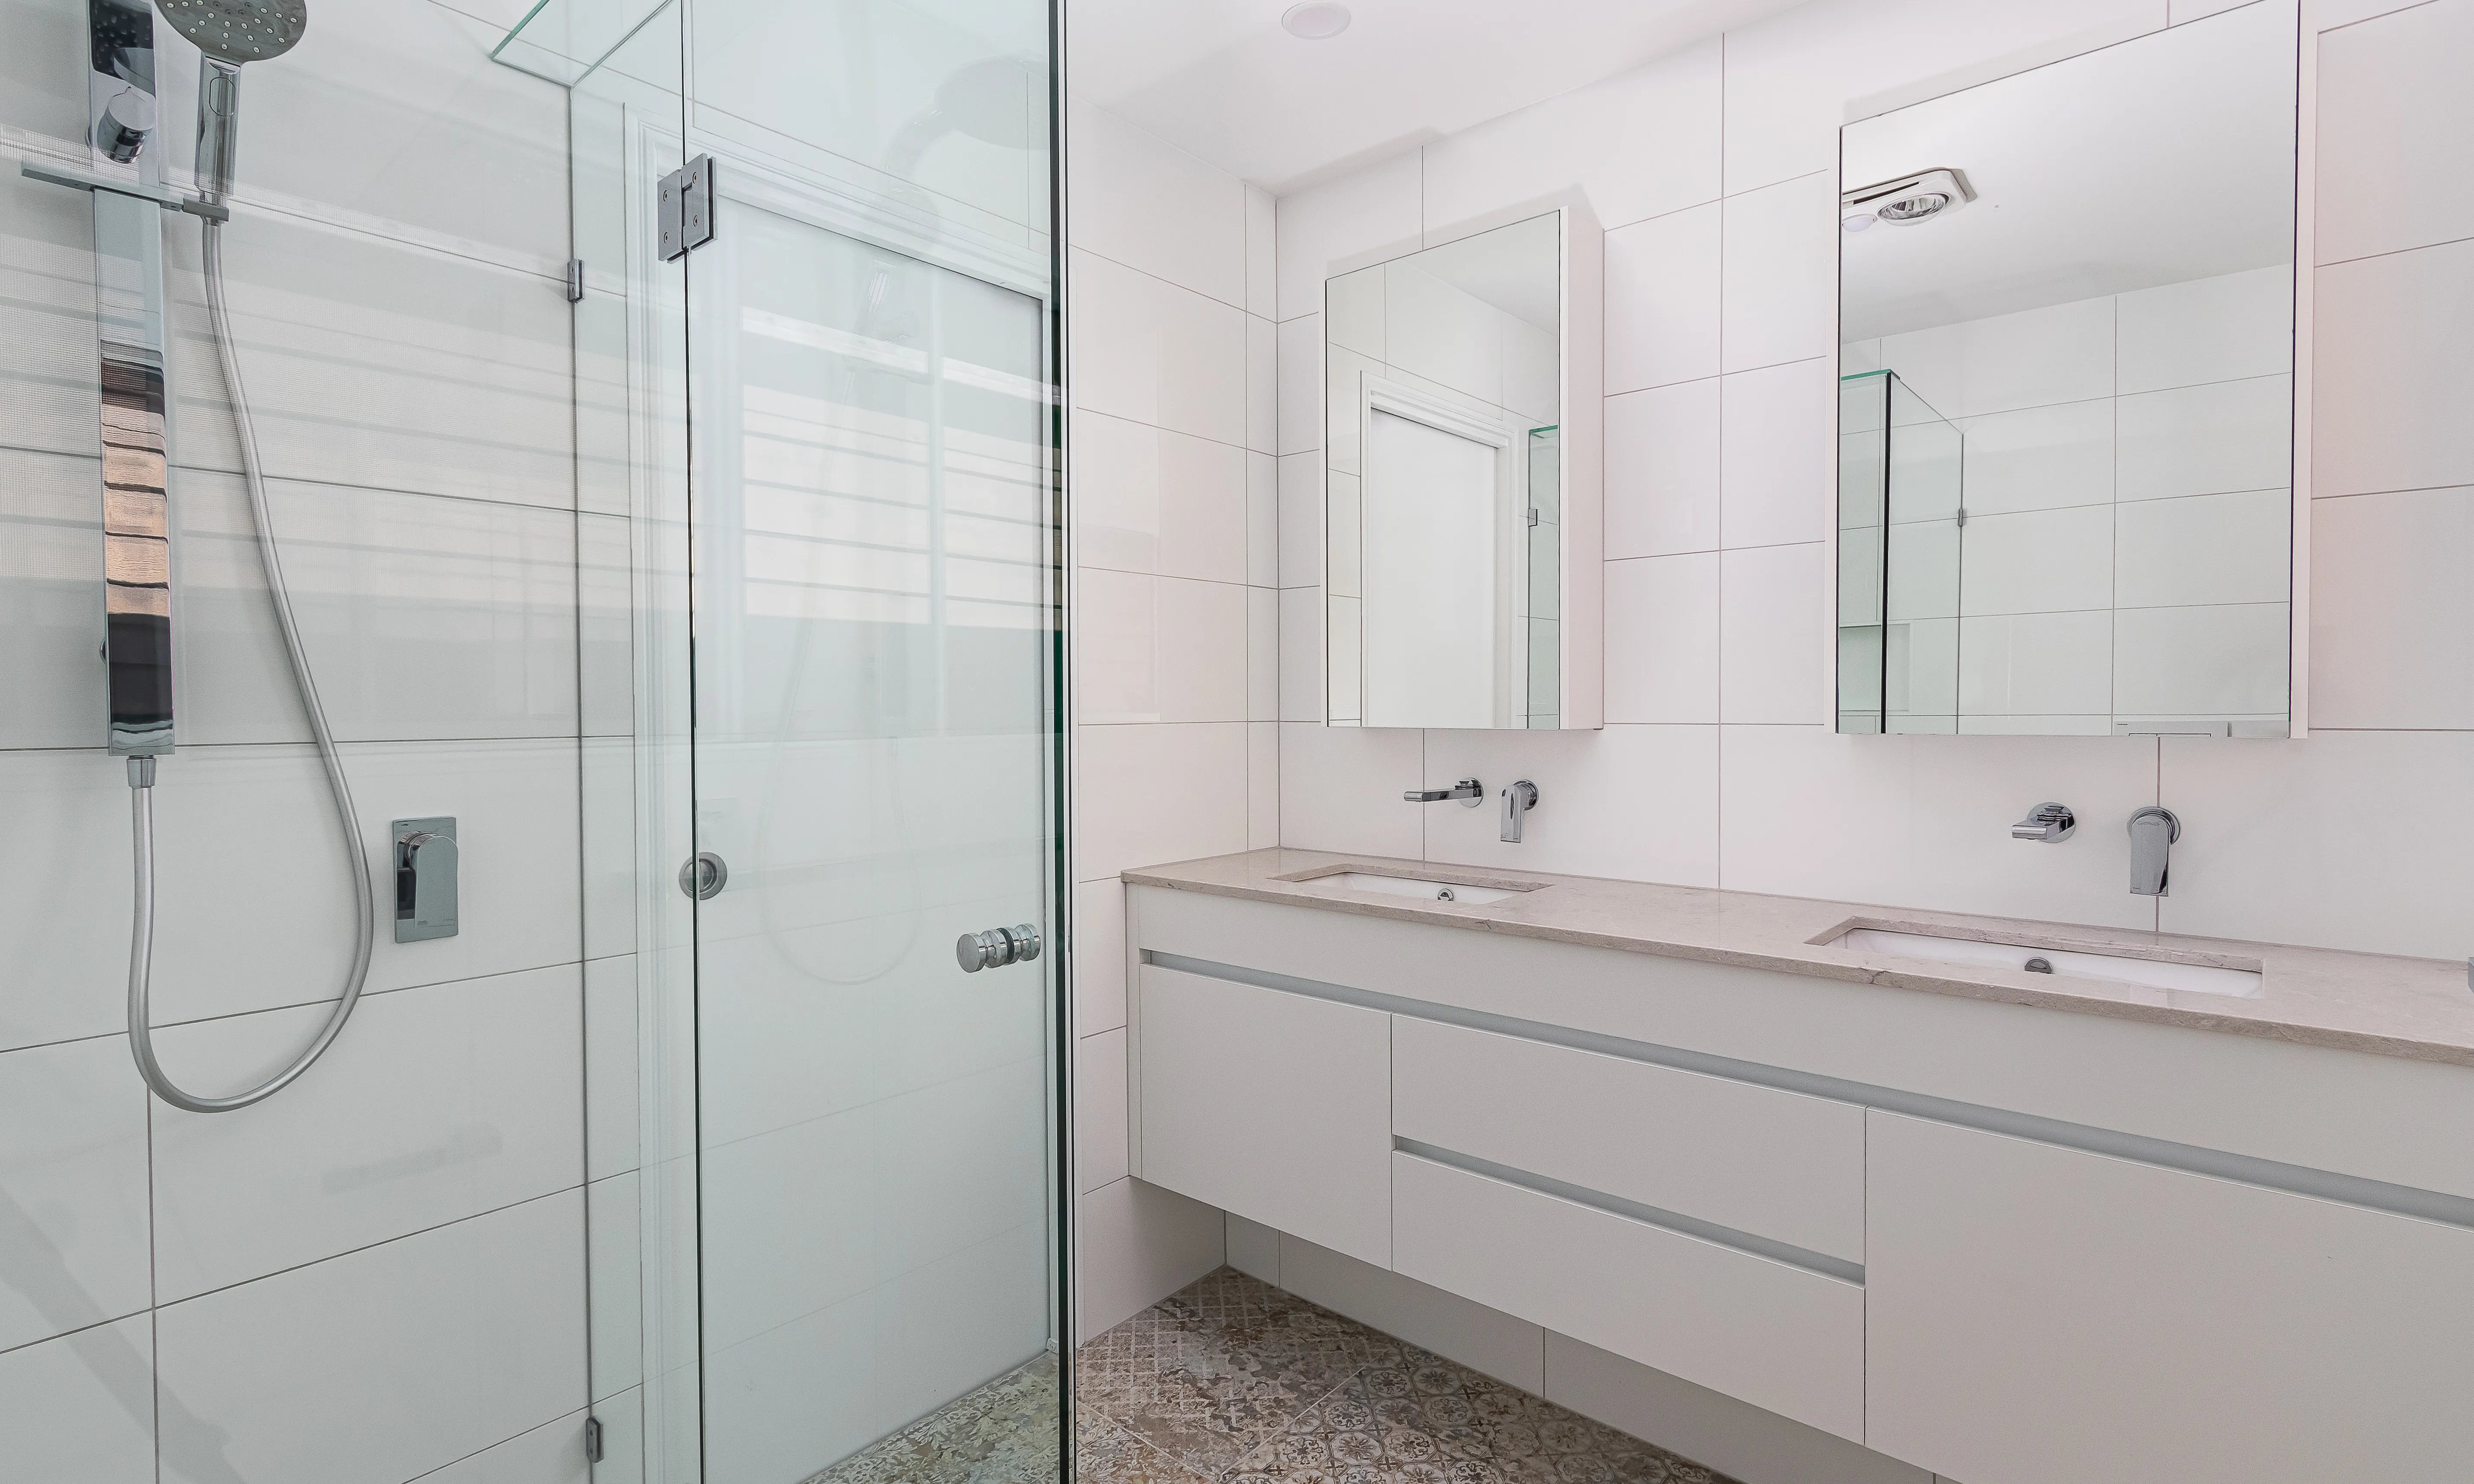 Ensuite with floating vanity, mirrored shaving cabinets and fixed glass shower screen